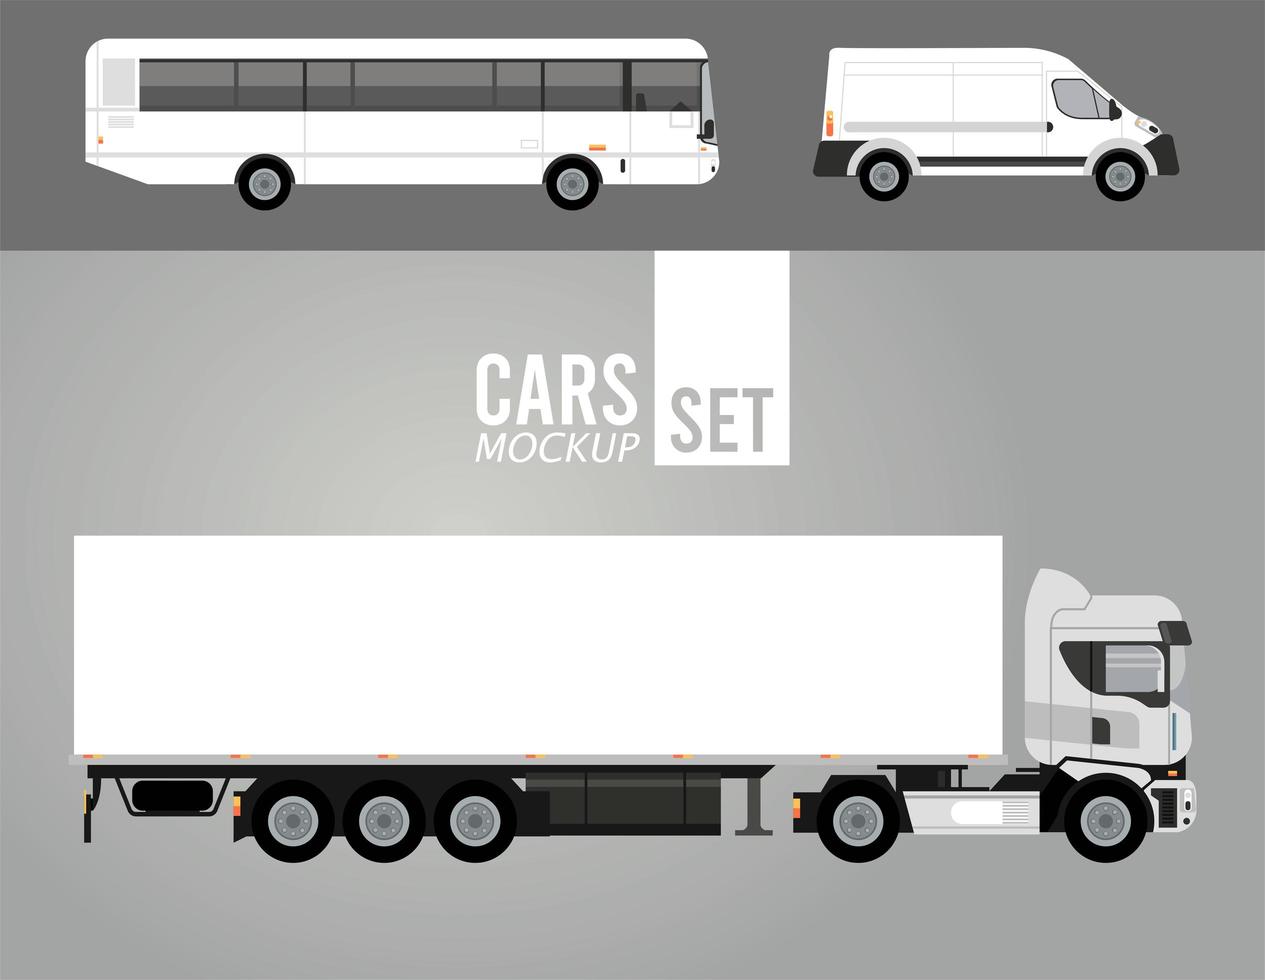 white truck and bus with mini van mockup cars vehicles icons vector